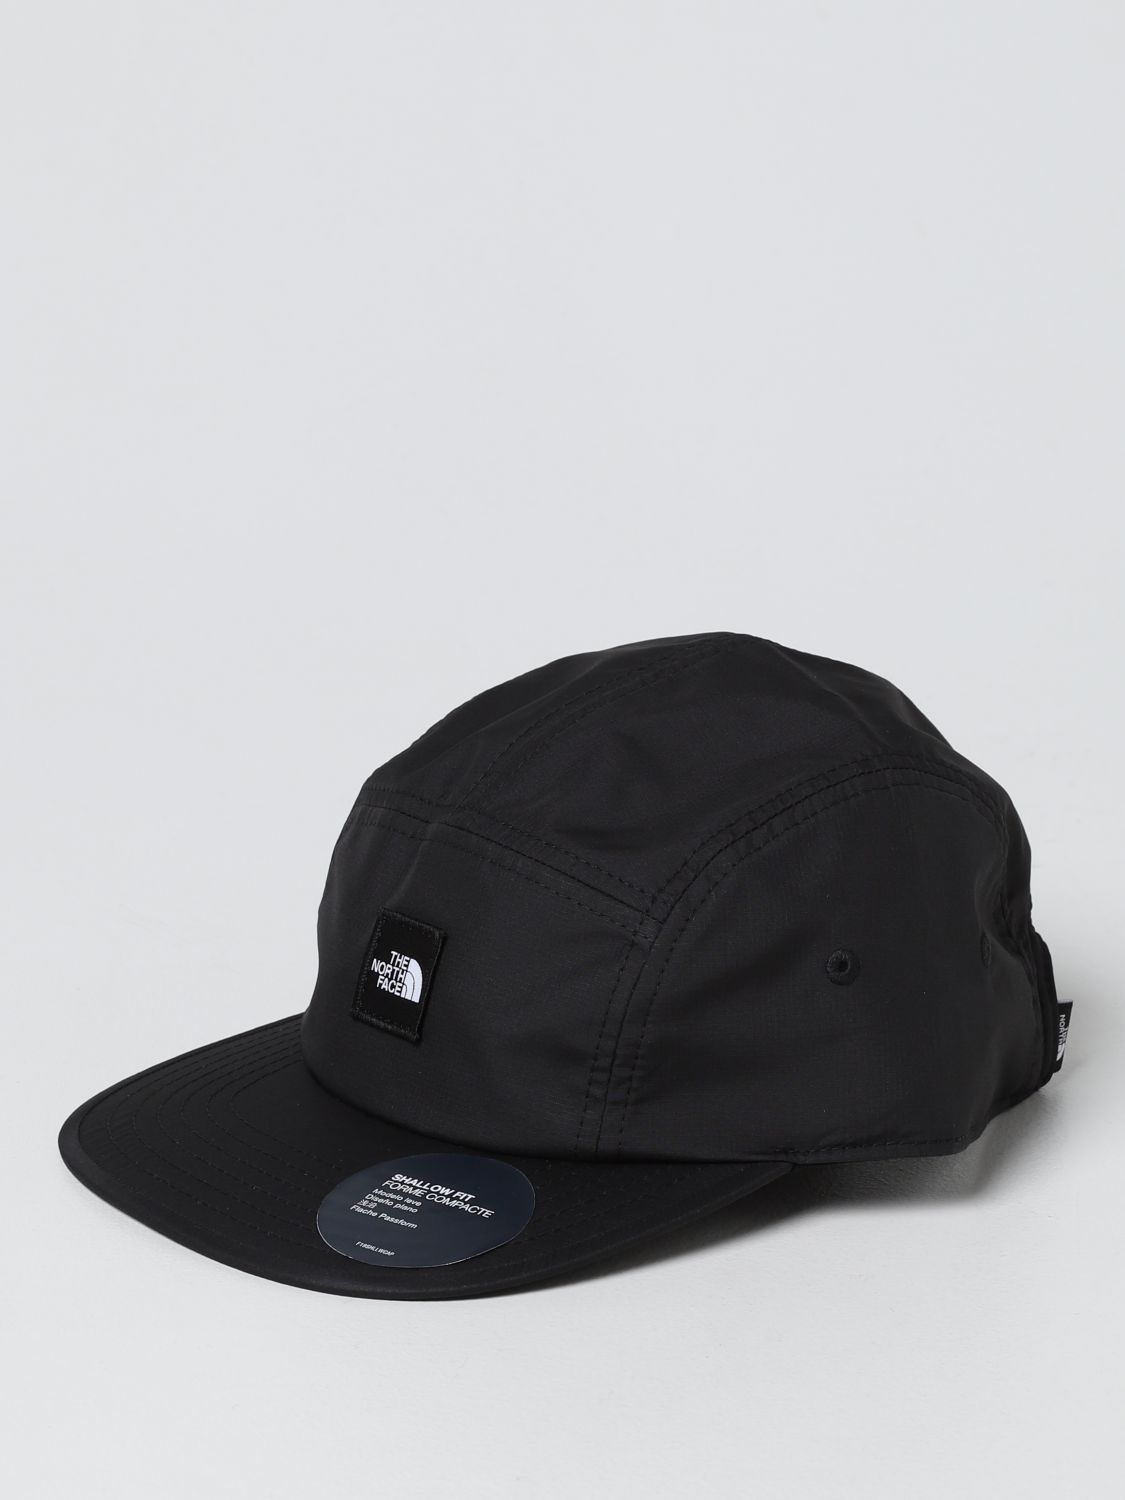 Hat The North Face: The North Face baseball cap with logo black 1